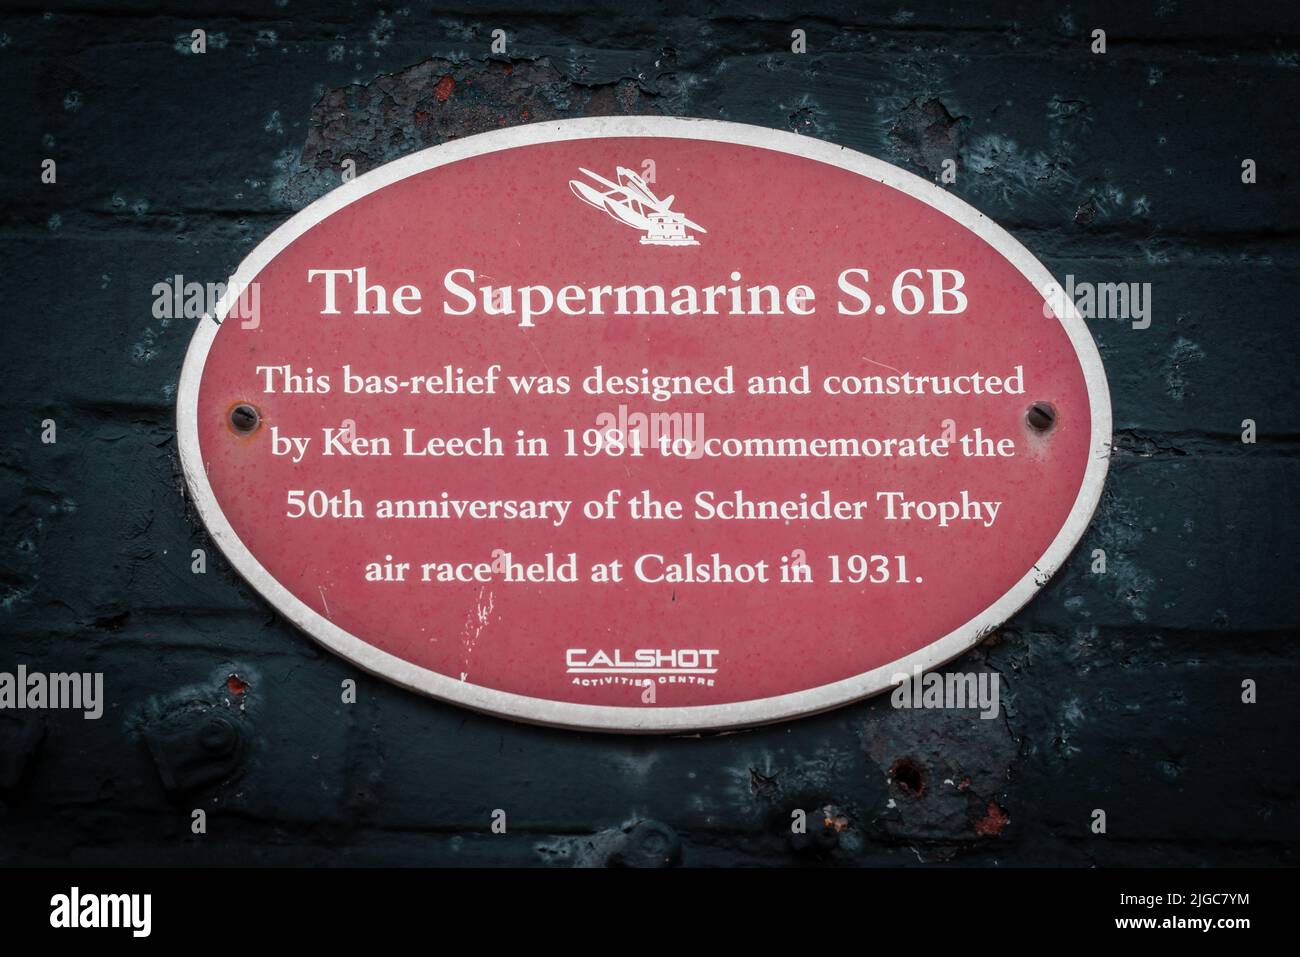 Commemorative plaque, designed by Ken Leech, for the 50th anniversary of the Schneider Trophy air race in Calshot 1931, Southampton, England, UK Stock Photo